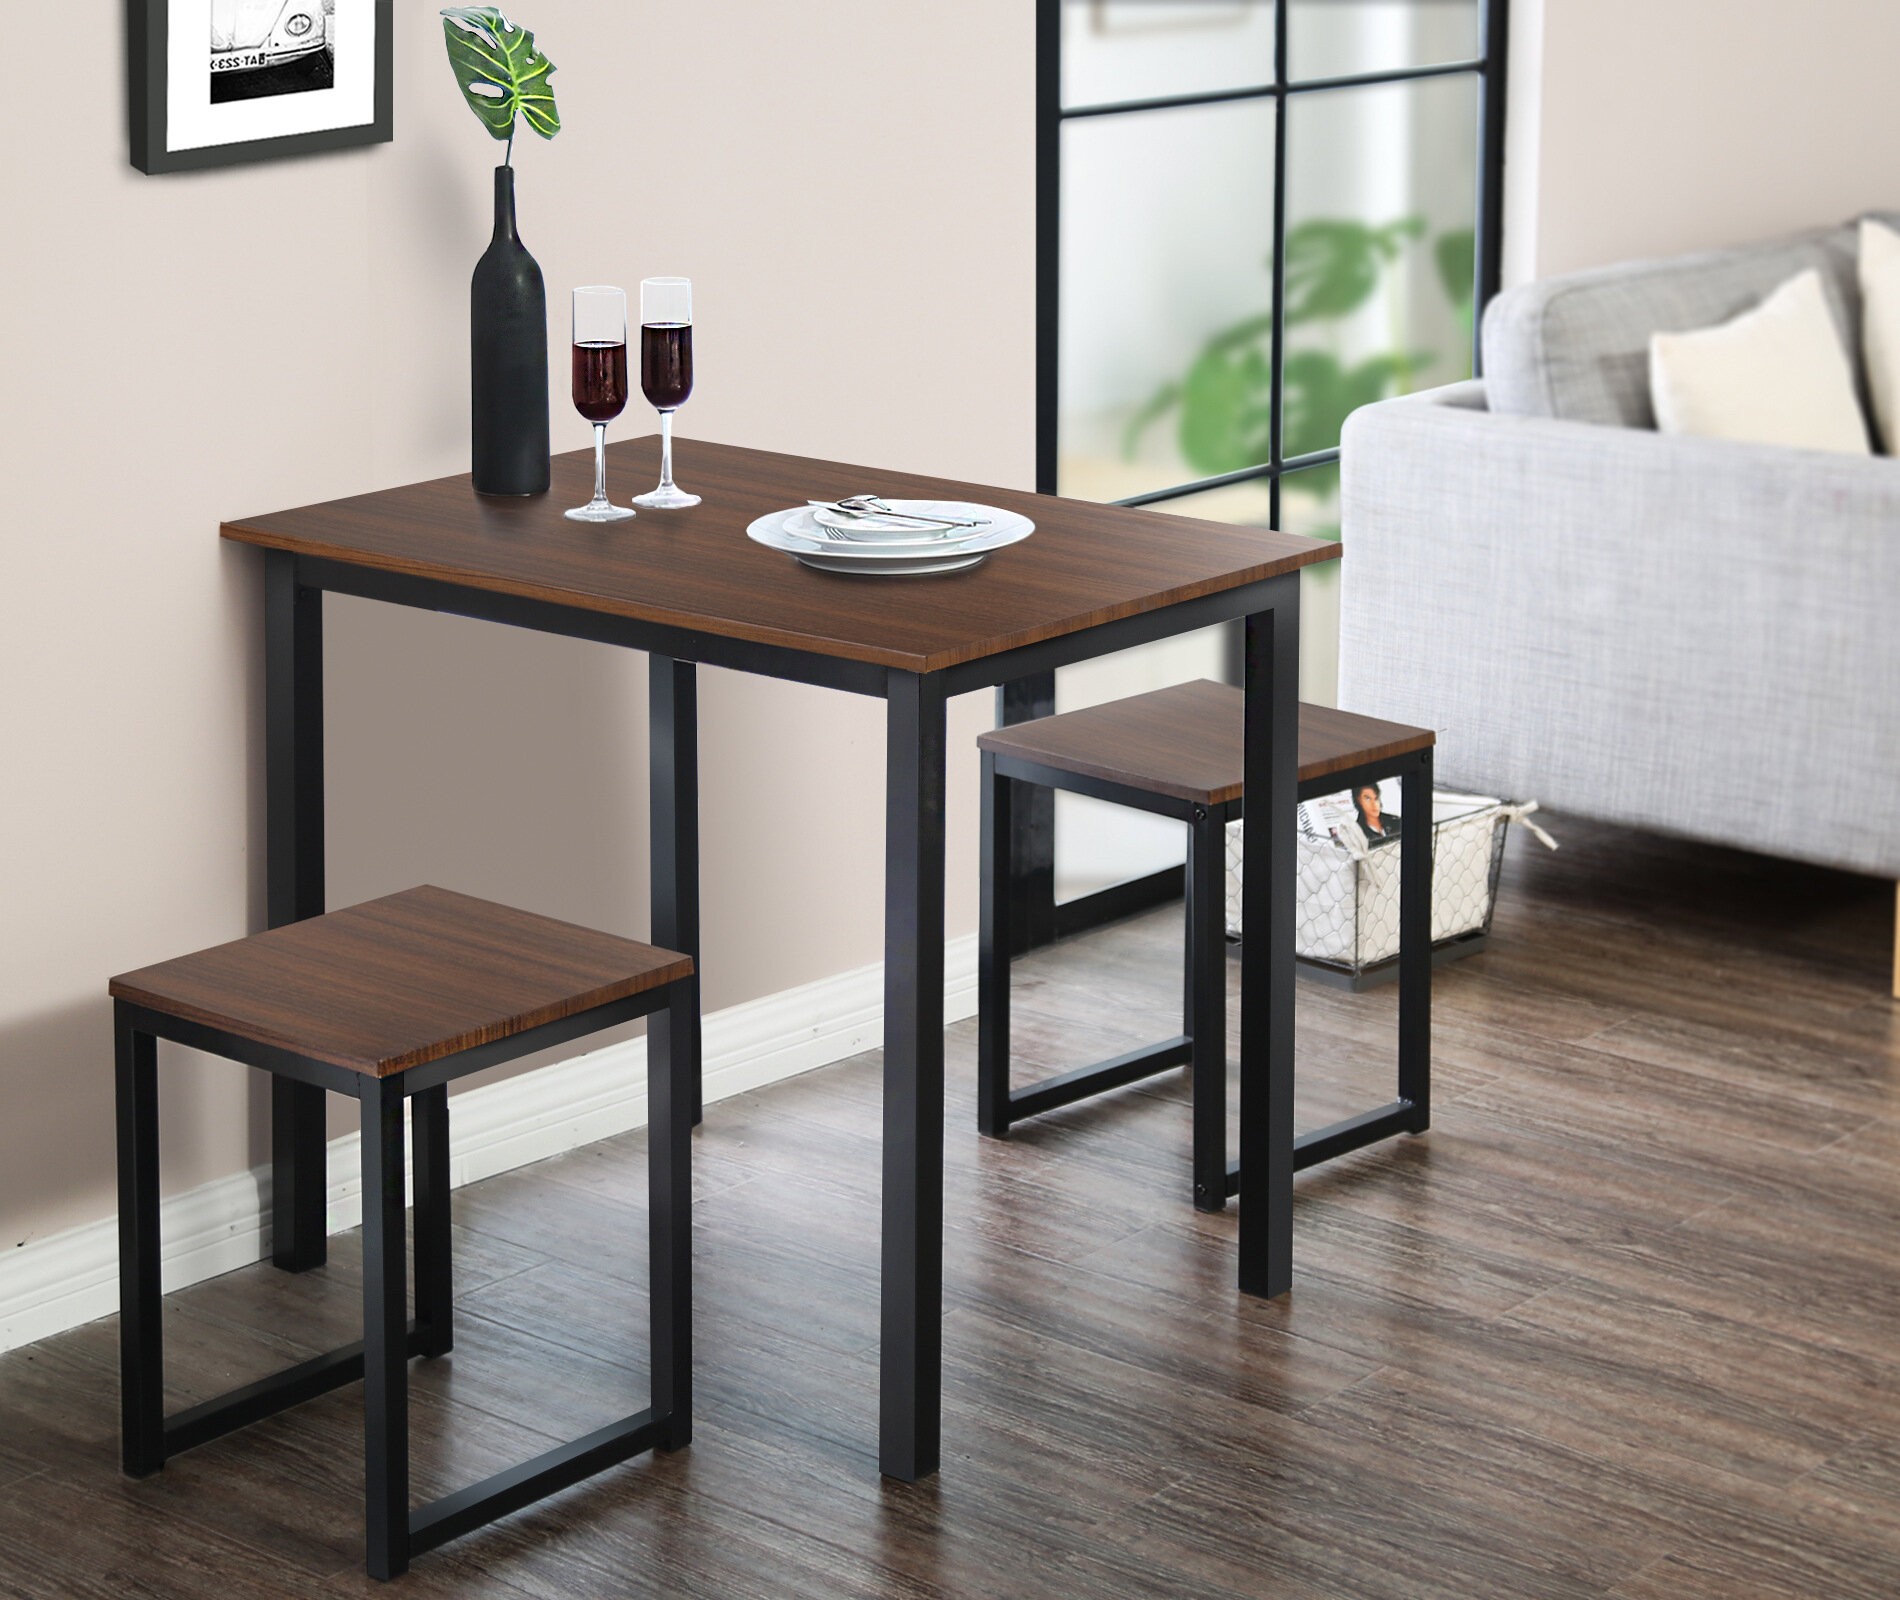 Small Dinette Sets for Small Kitchen Spaces - Ideas on Foter